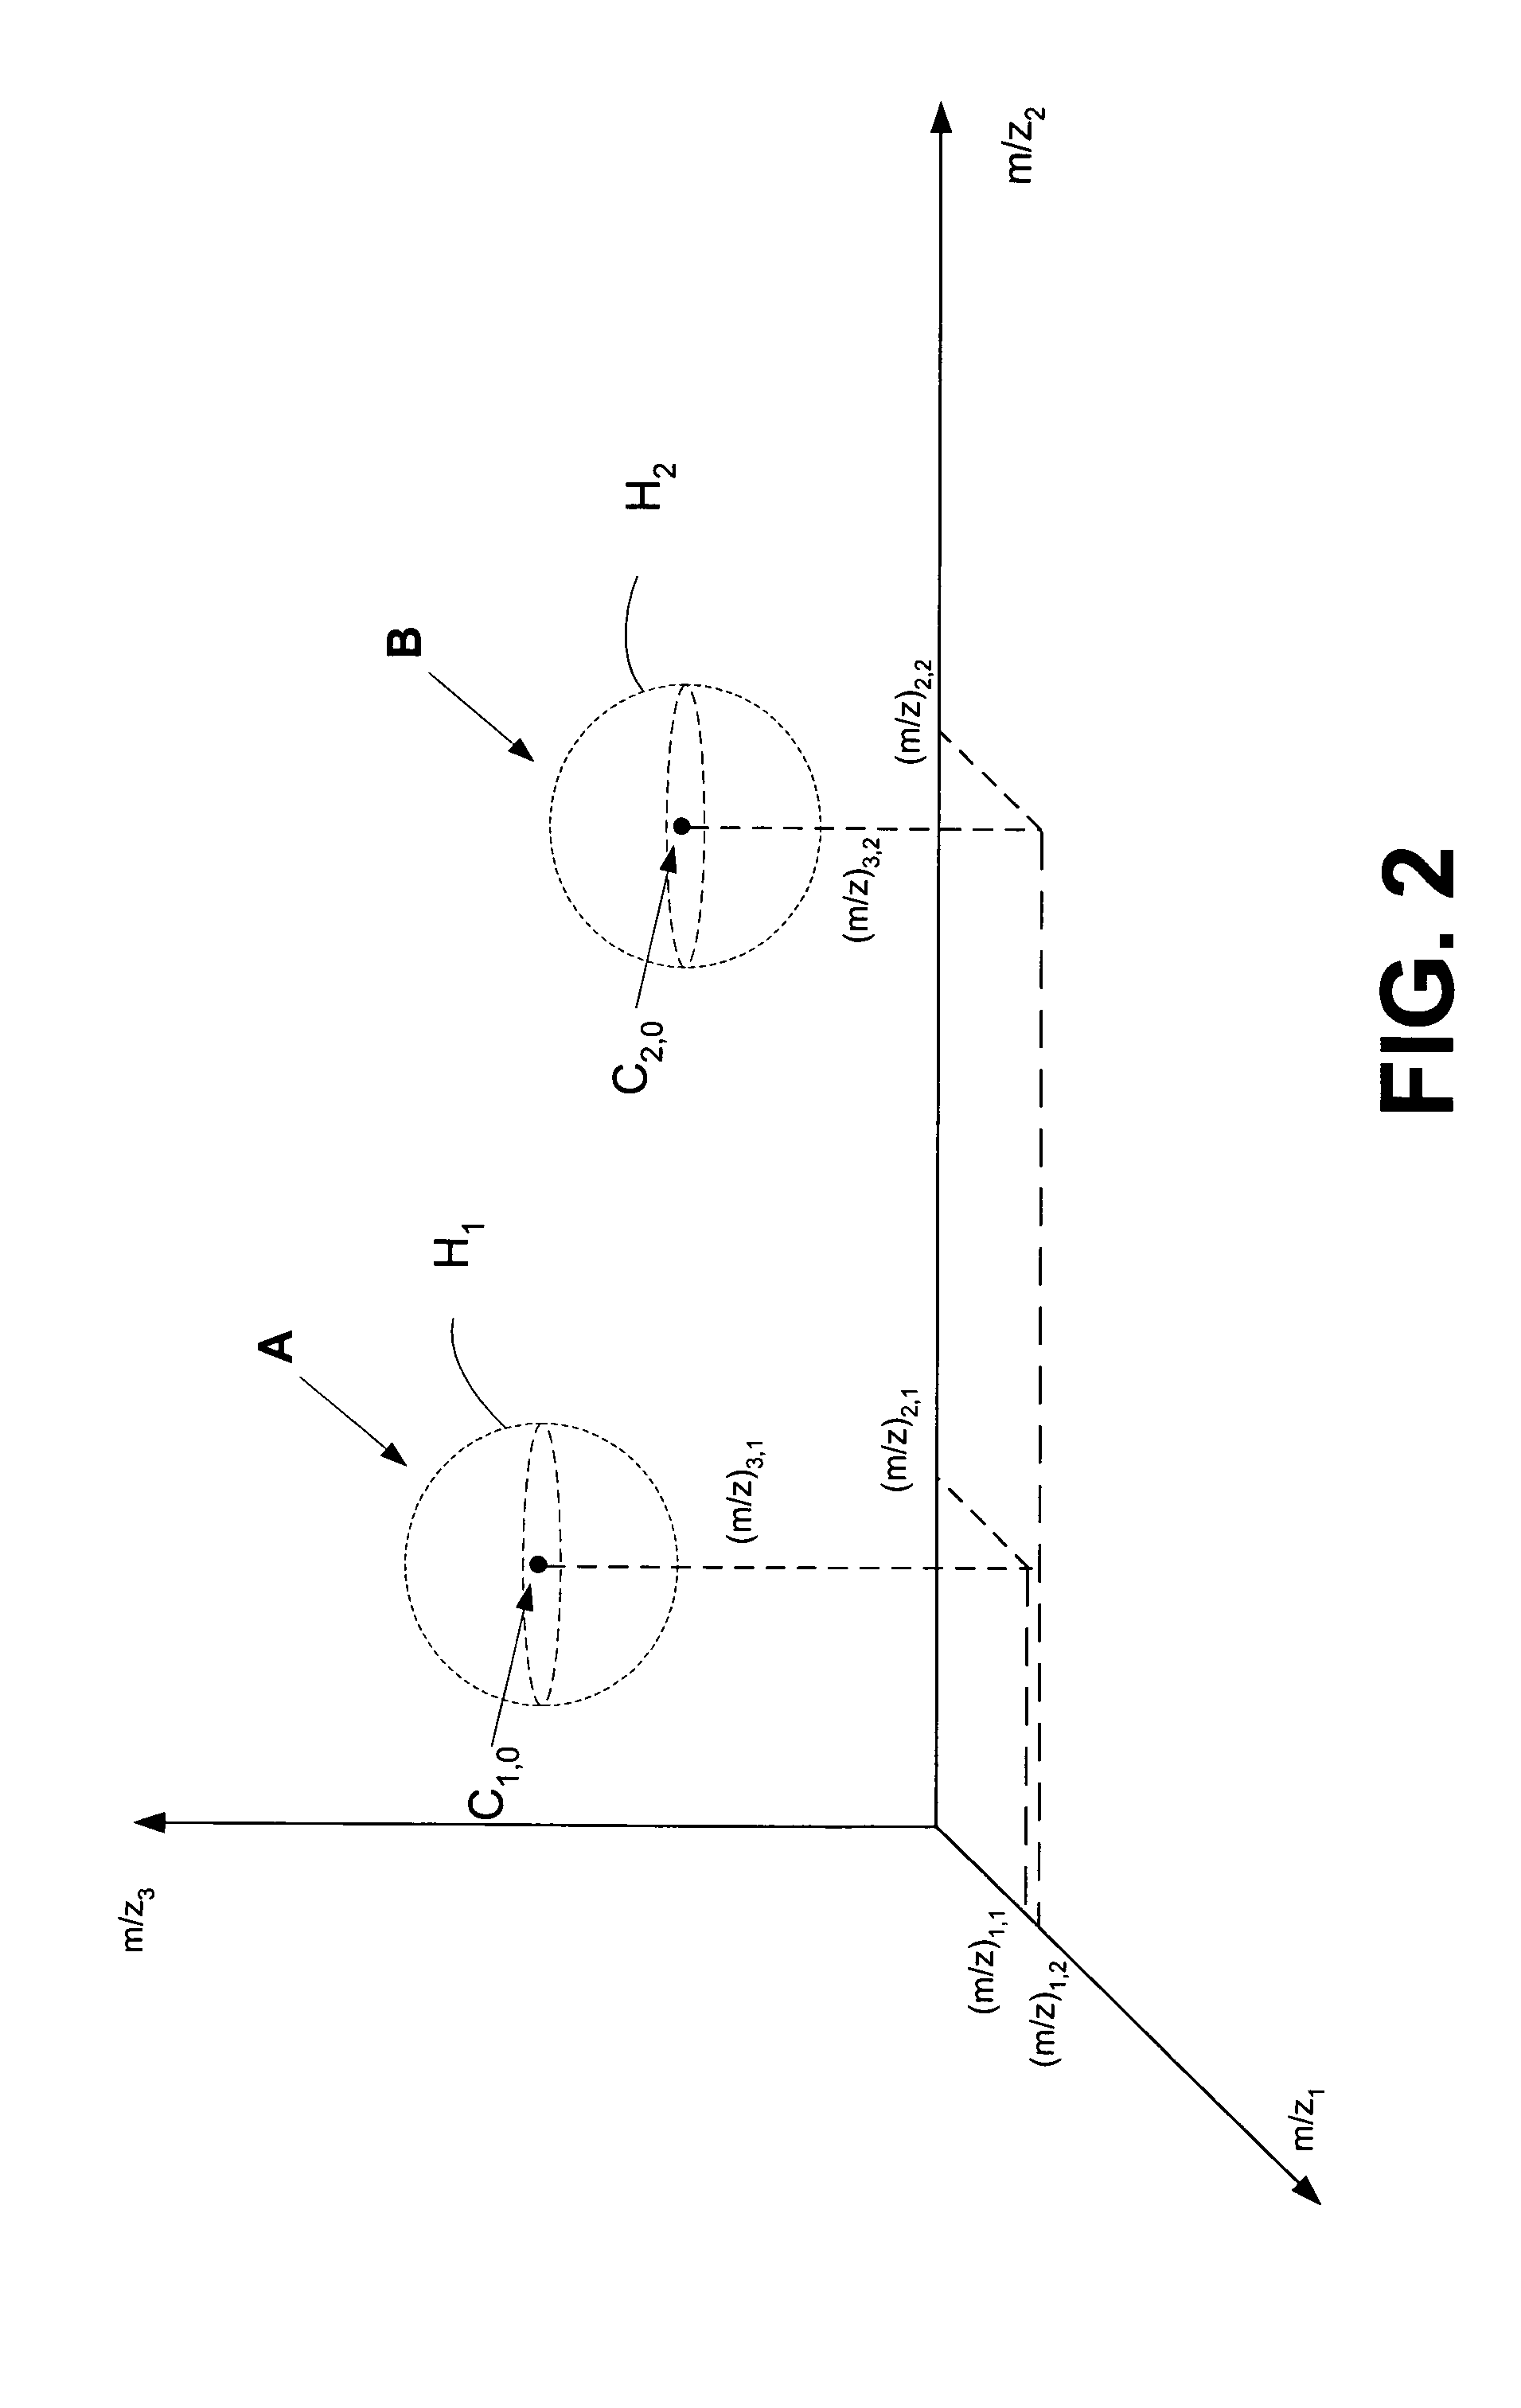 Method of diagnosing biological states through the use of a centralized, adaptive model, and remote sample processing